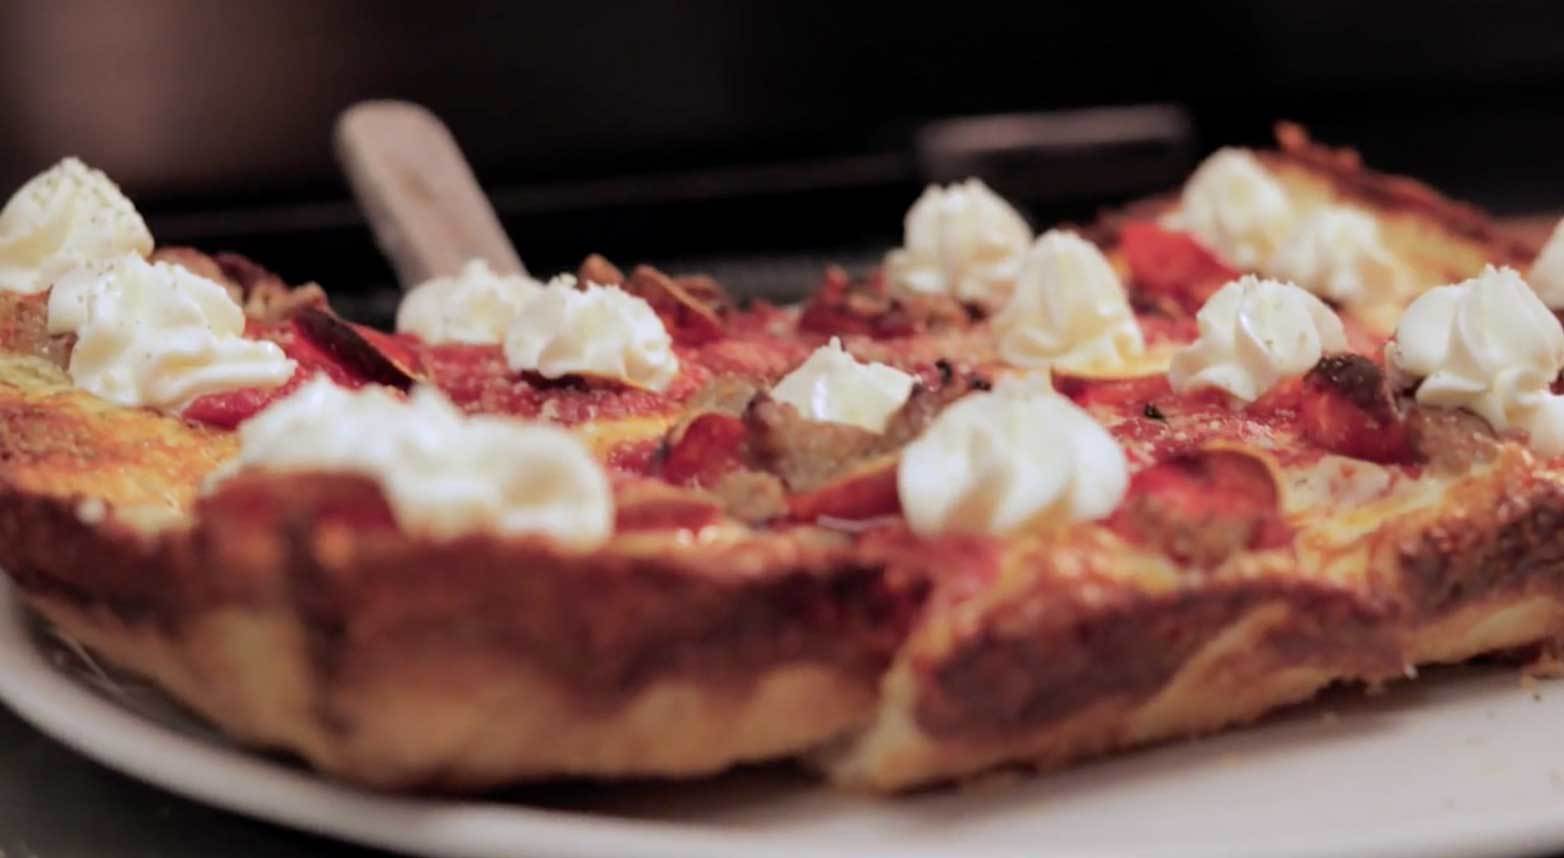 Detroit-style pizza featuring dollops of Ricotta